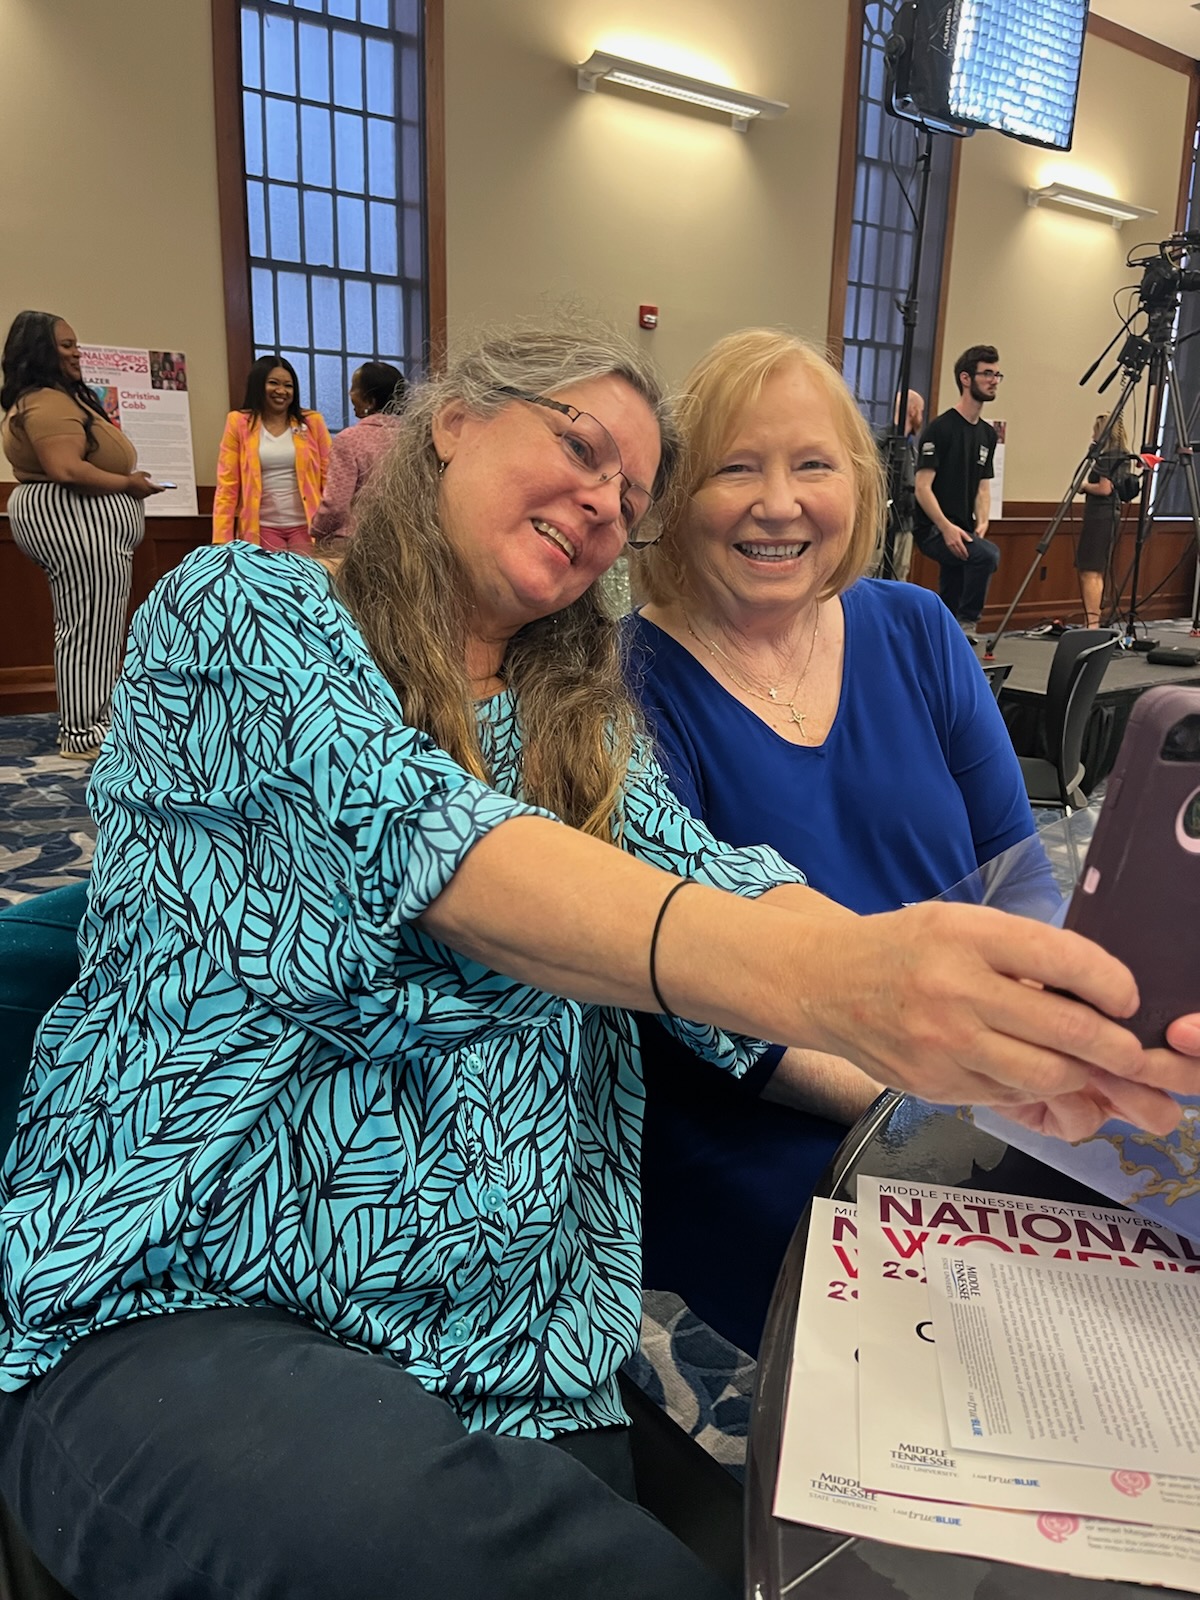 Dr. Vicky Maclean sitting next to Marie Harrell smiling. Dr. Maclean is holding her cell phone in front of her to take a selfie with Marie.